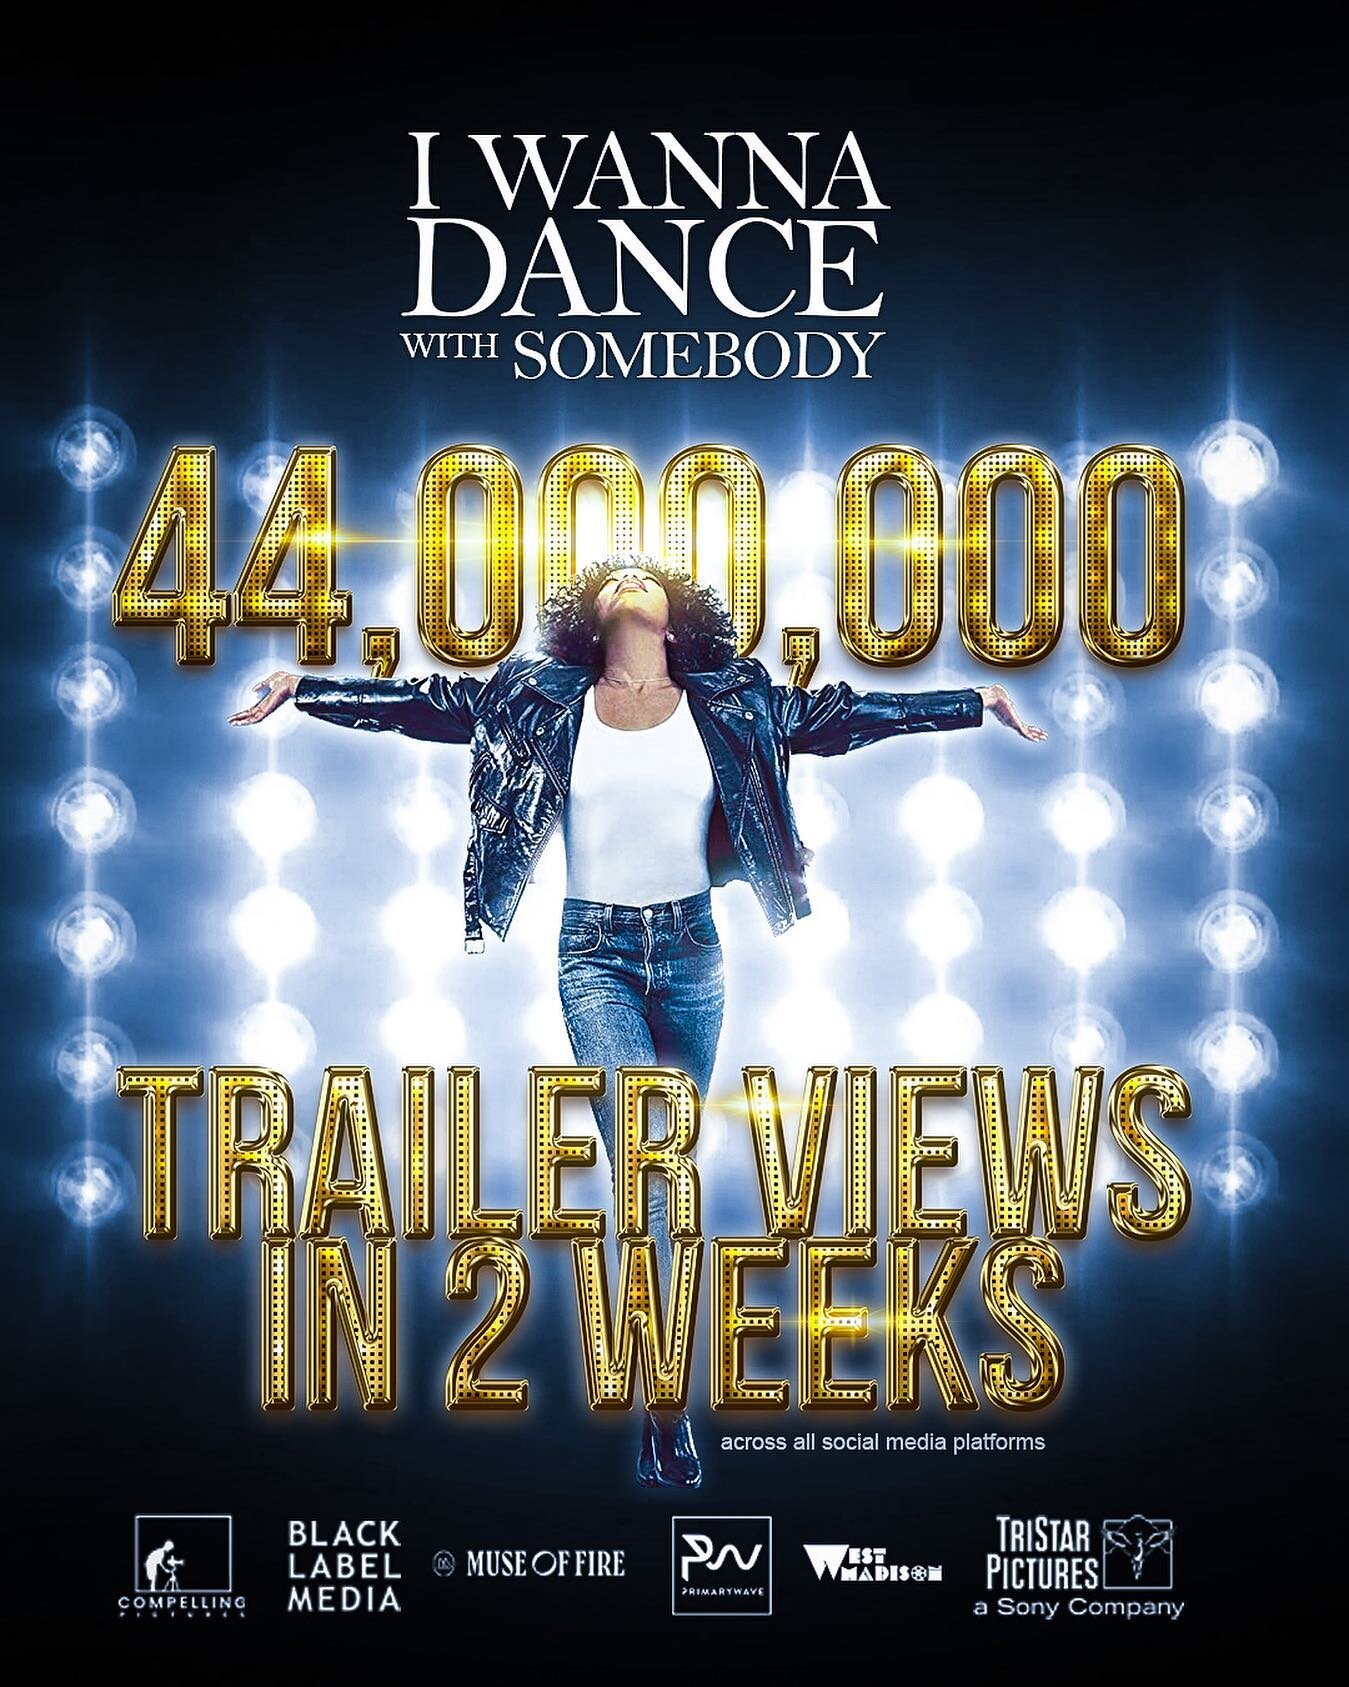 Happy Friday! 2 week update! ▶️ 44,000,000 #iwannadancemovie trailer views in two weeks across all social media platforms via @sonypictures @wannadancemovie accounts. This is huge!!! 

Let&rsquo;s keep the love going. Share this post, comment below a